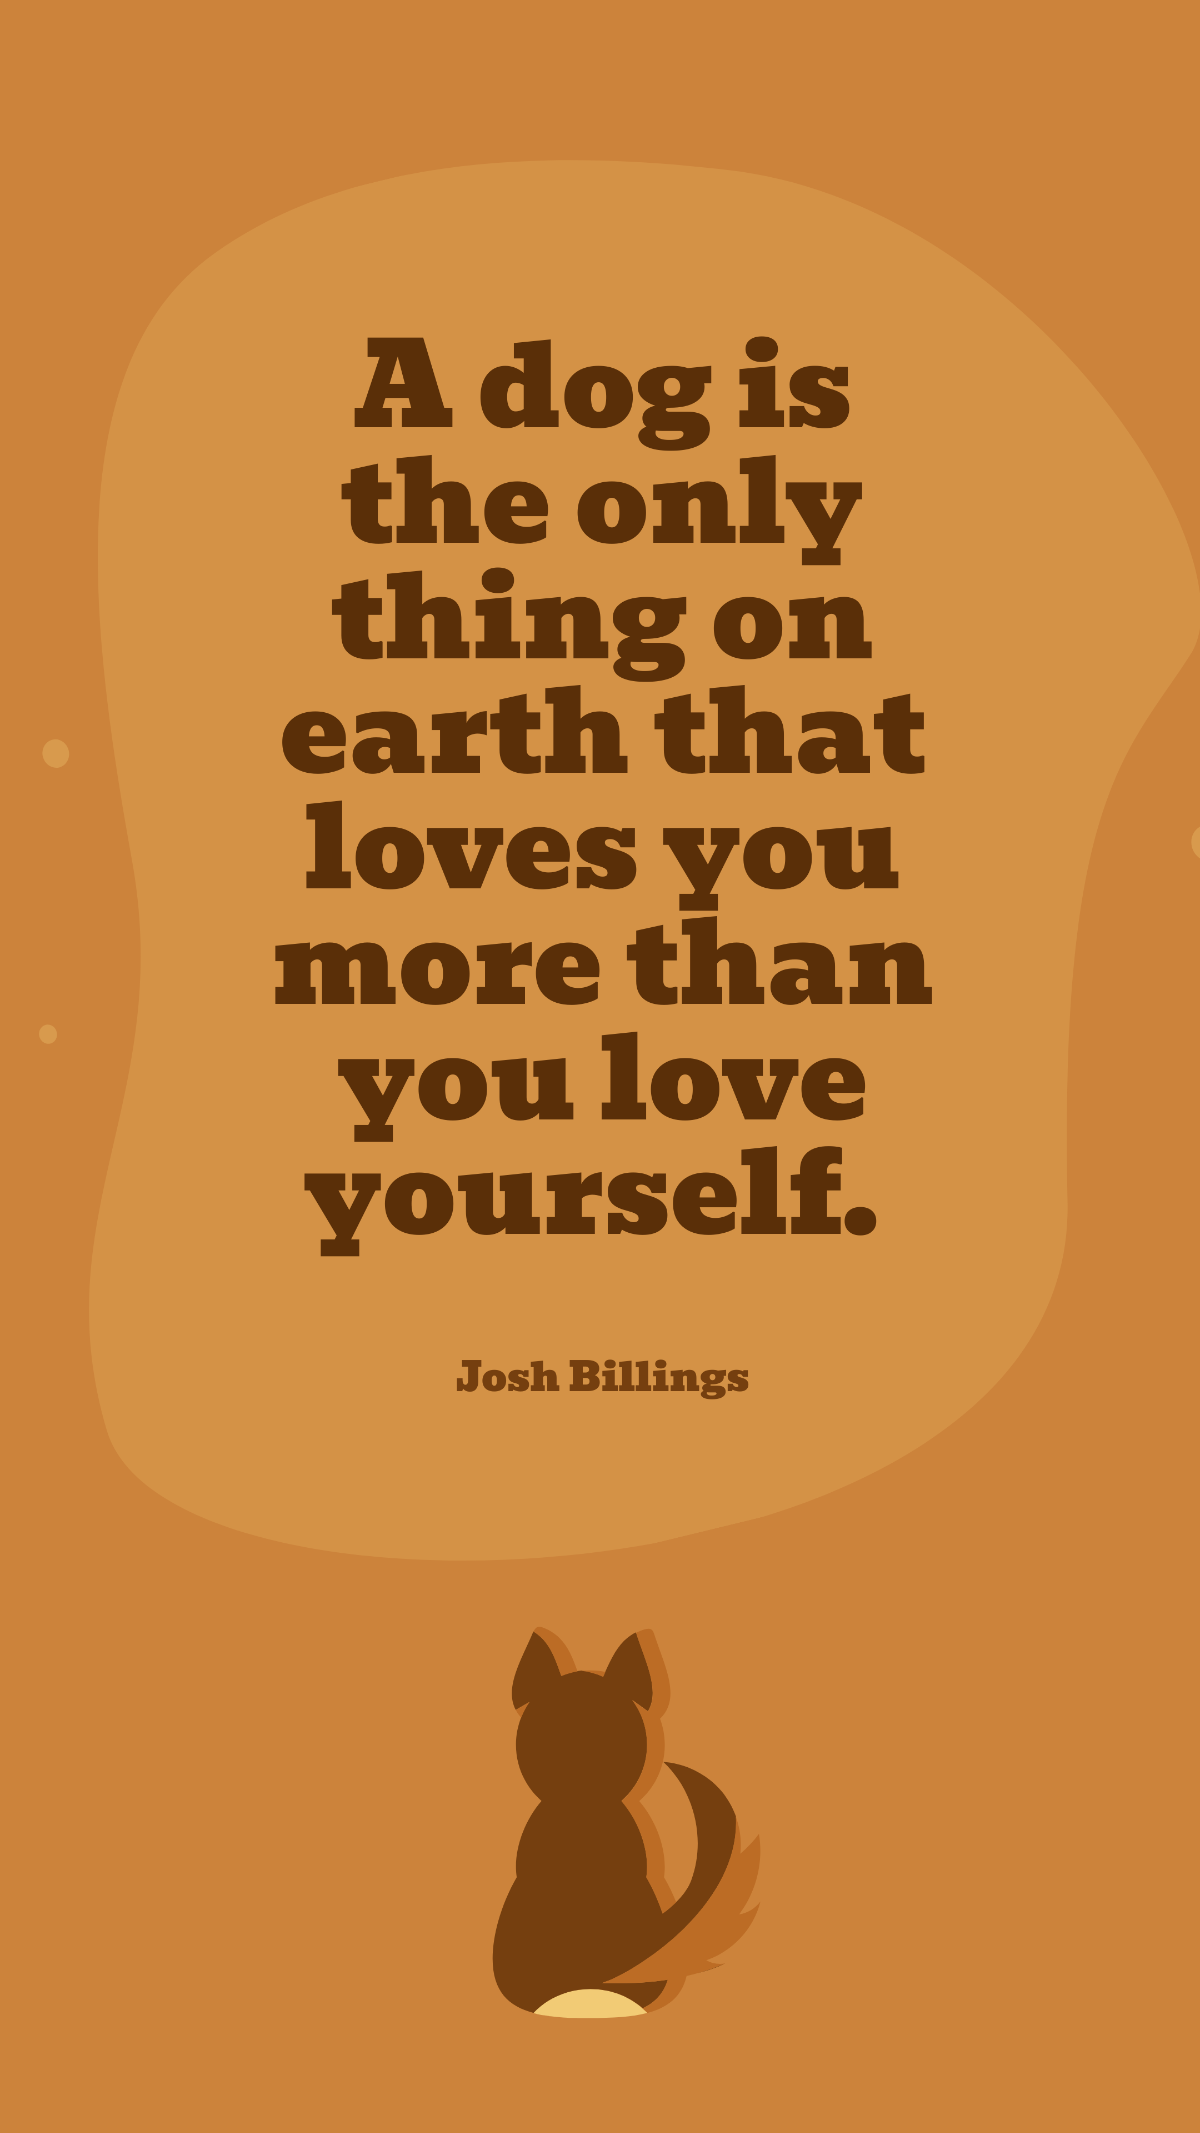 Josh Billings - A dog is the only thing on earth that loves you more than you love yourself. Template